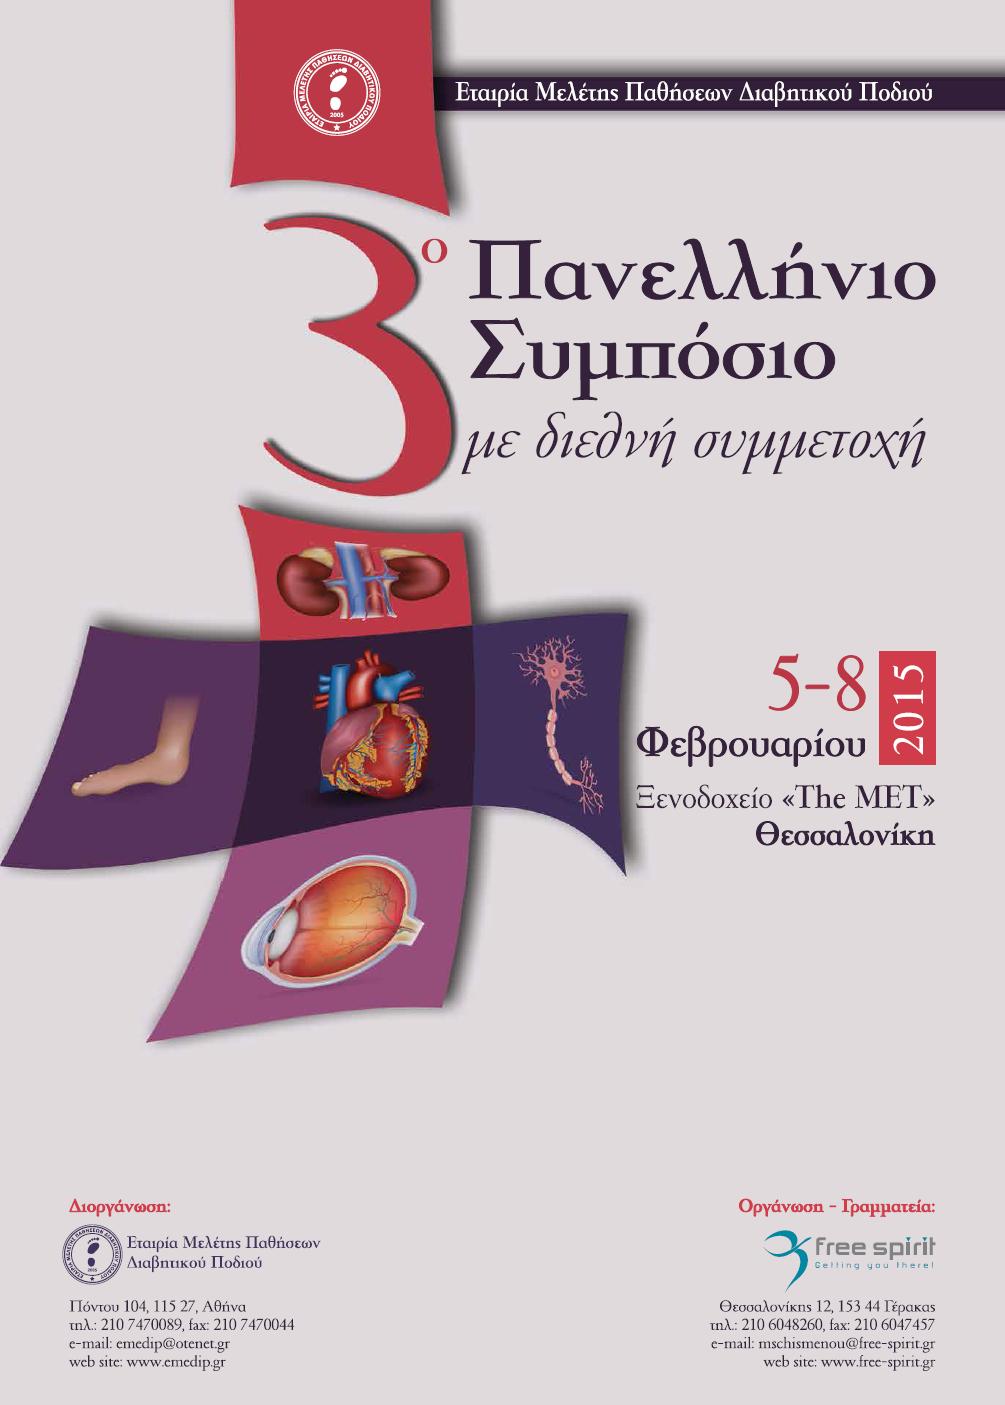 3rd Panhellenic Symposium with International Participation